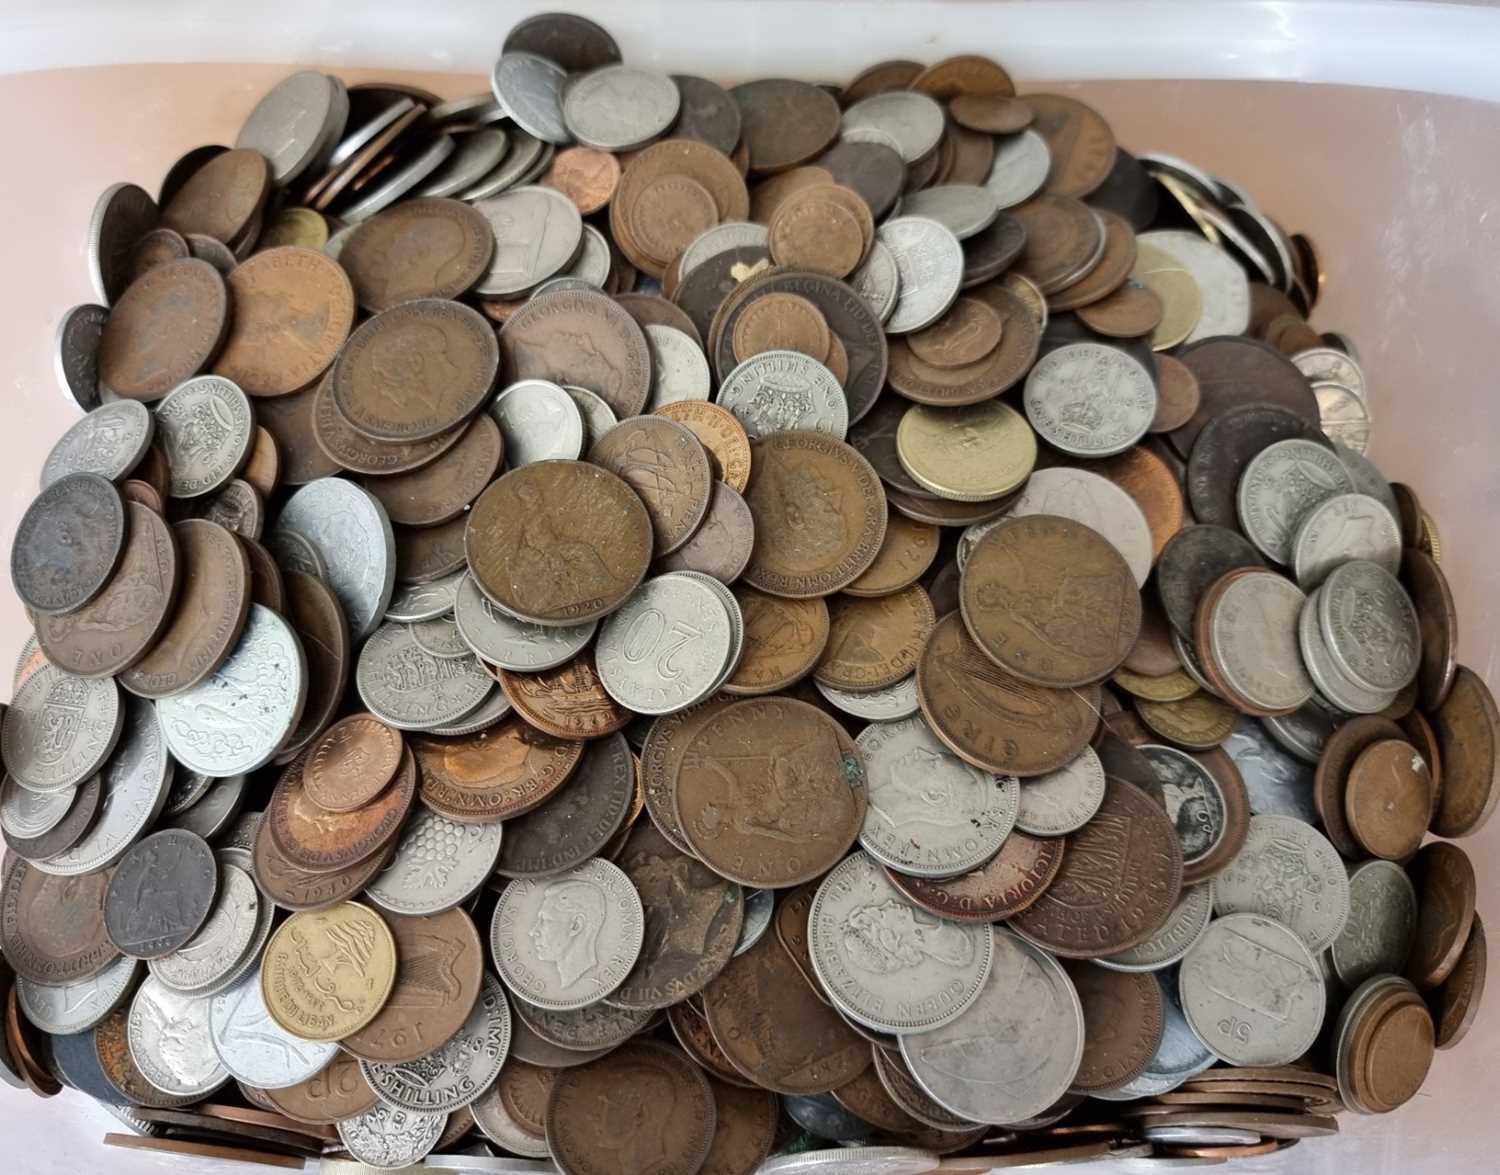 A large collection of British and world coins, mostly British pre-decimal and silver and half-silver